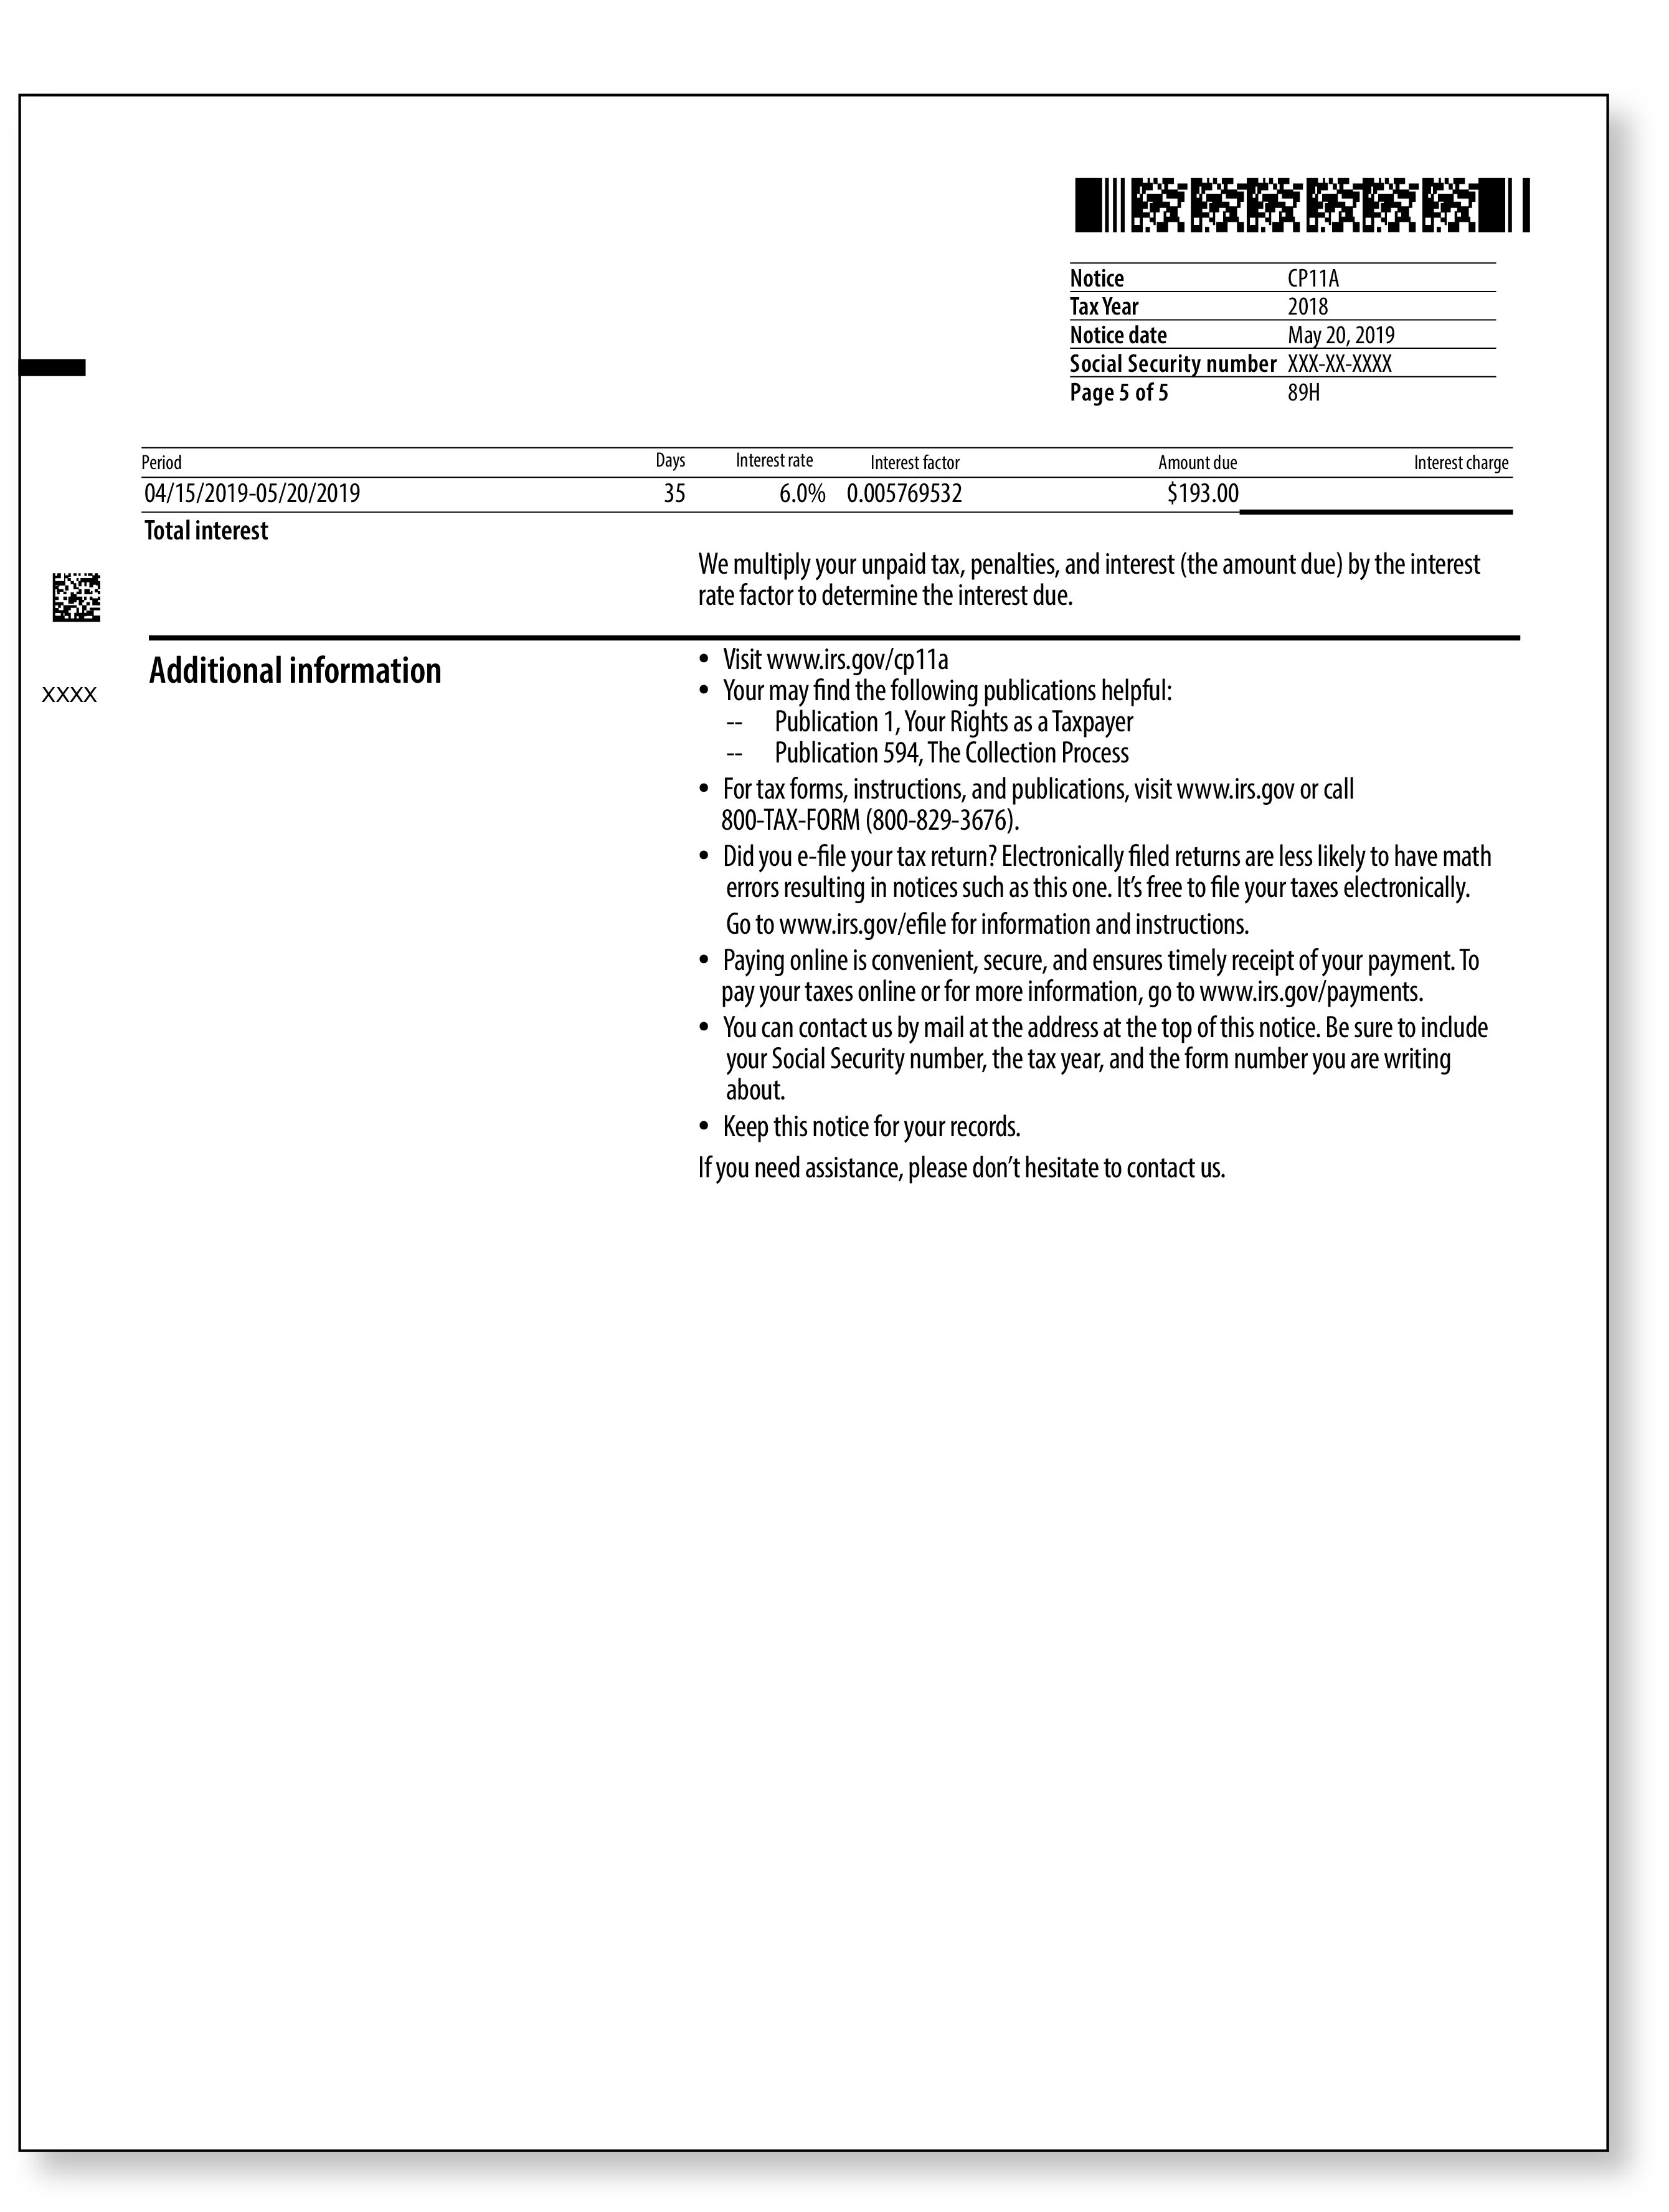 IRS Audit Letter CP11A – Sample 1